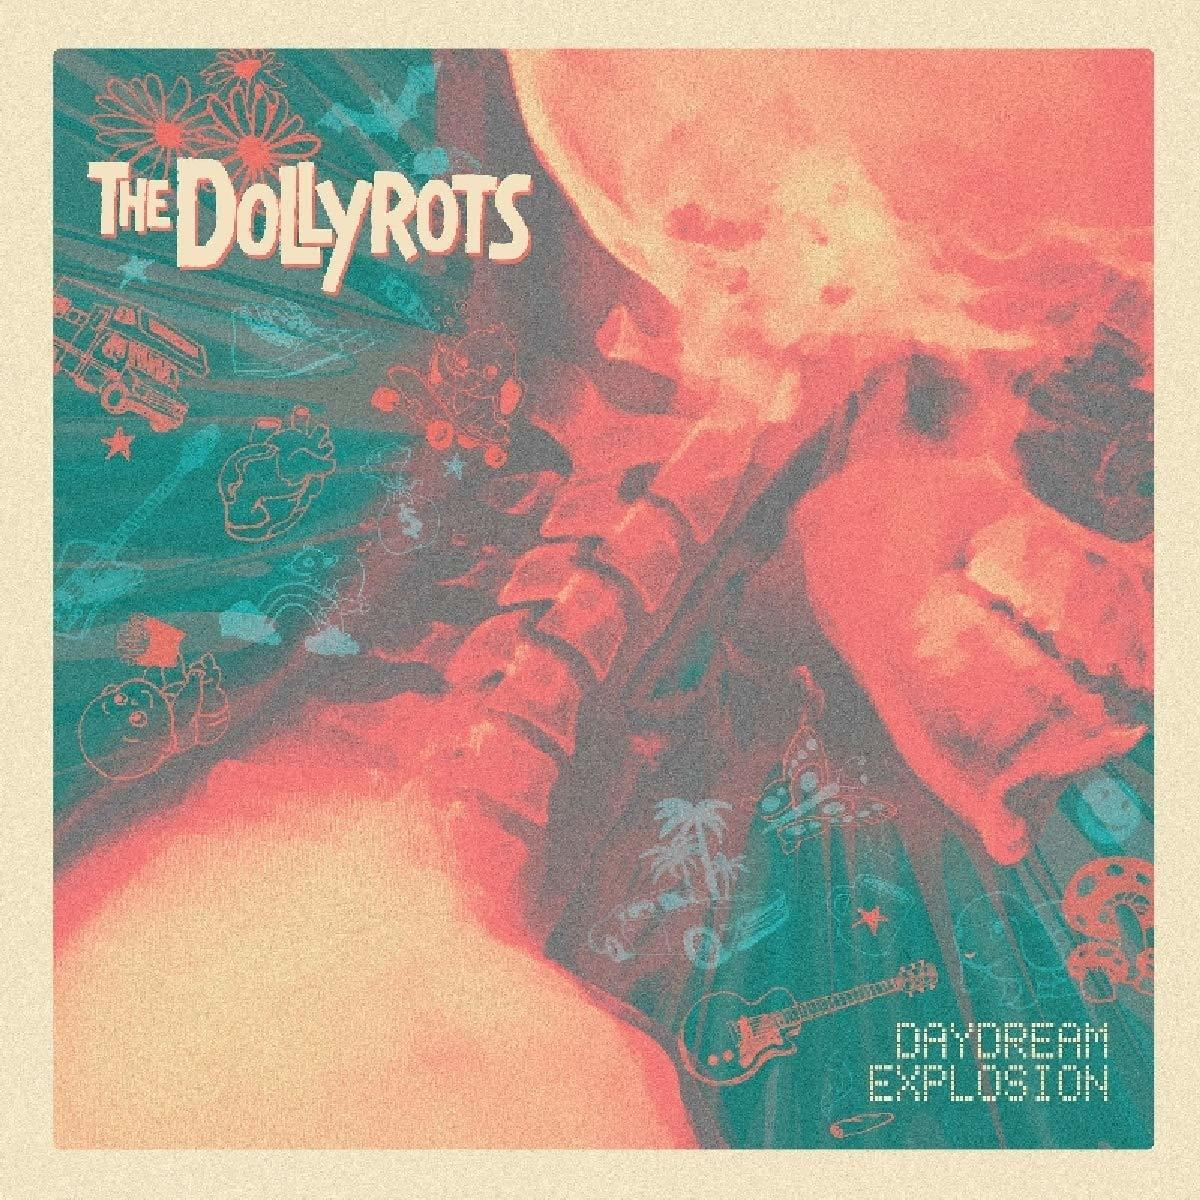 The Dollyrots Daydream - Explosion (CD) 